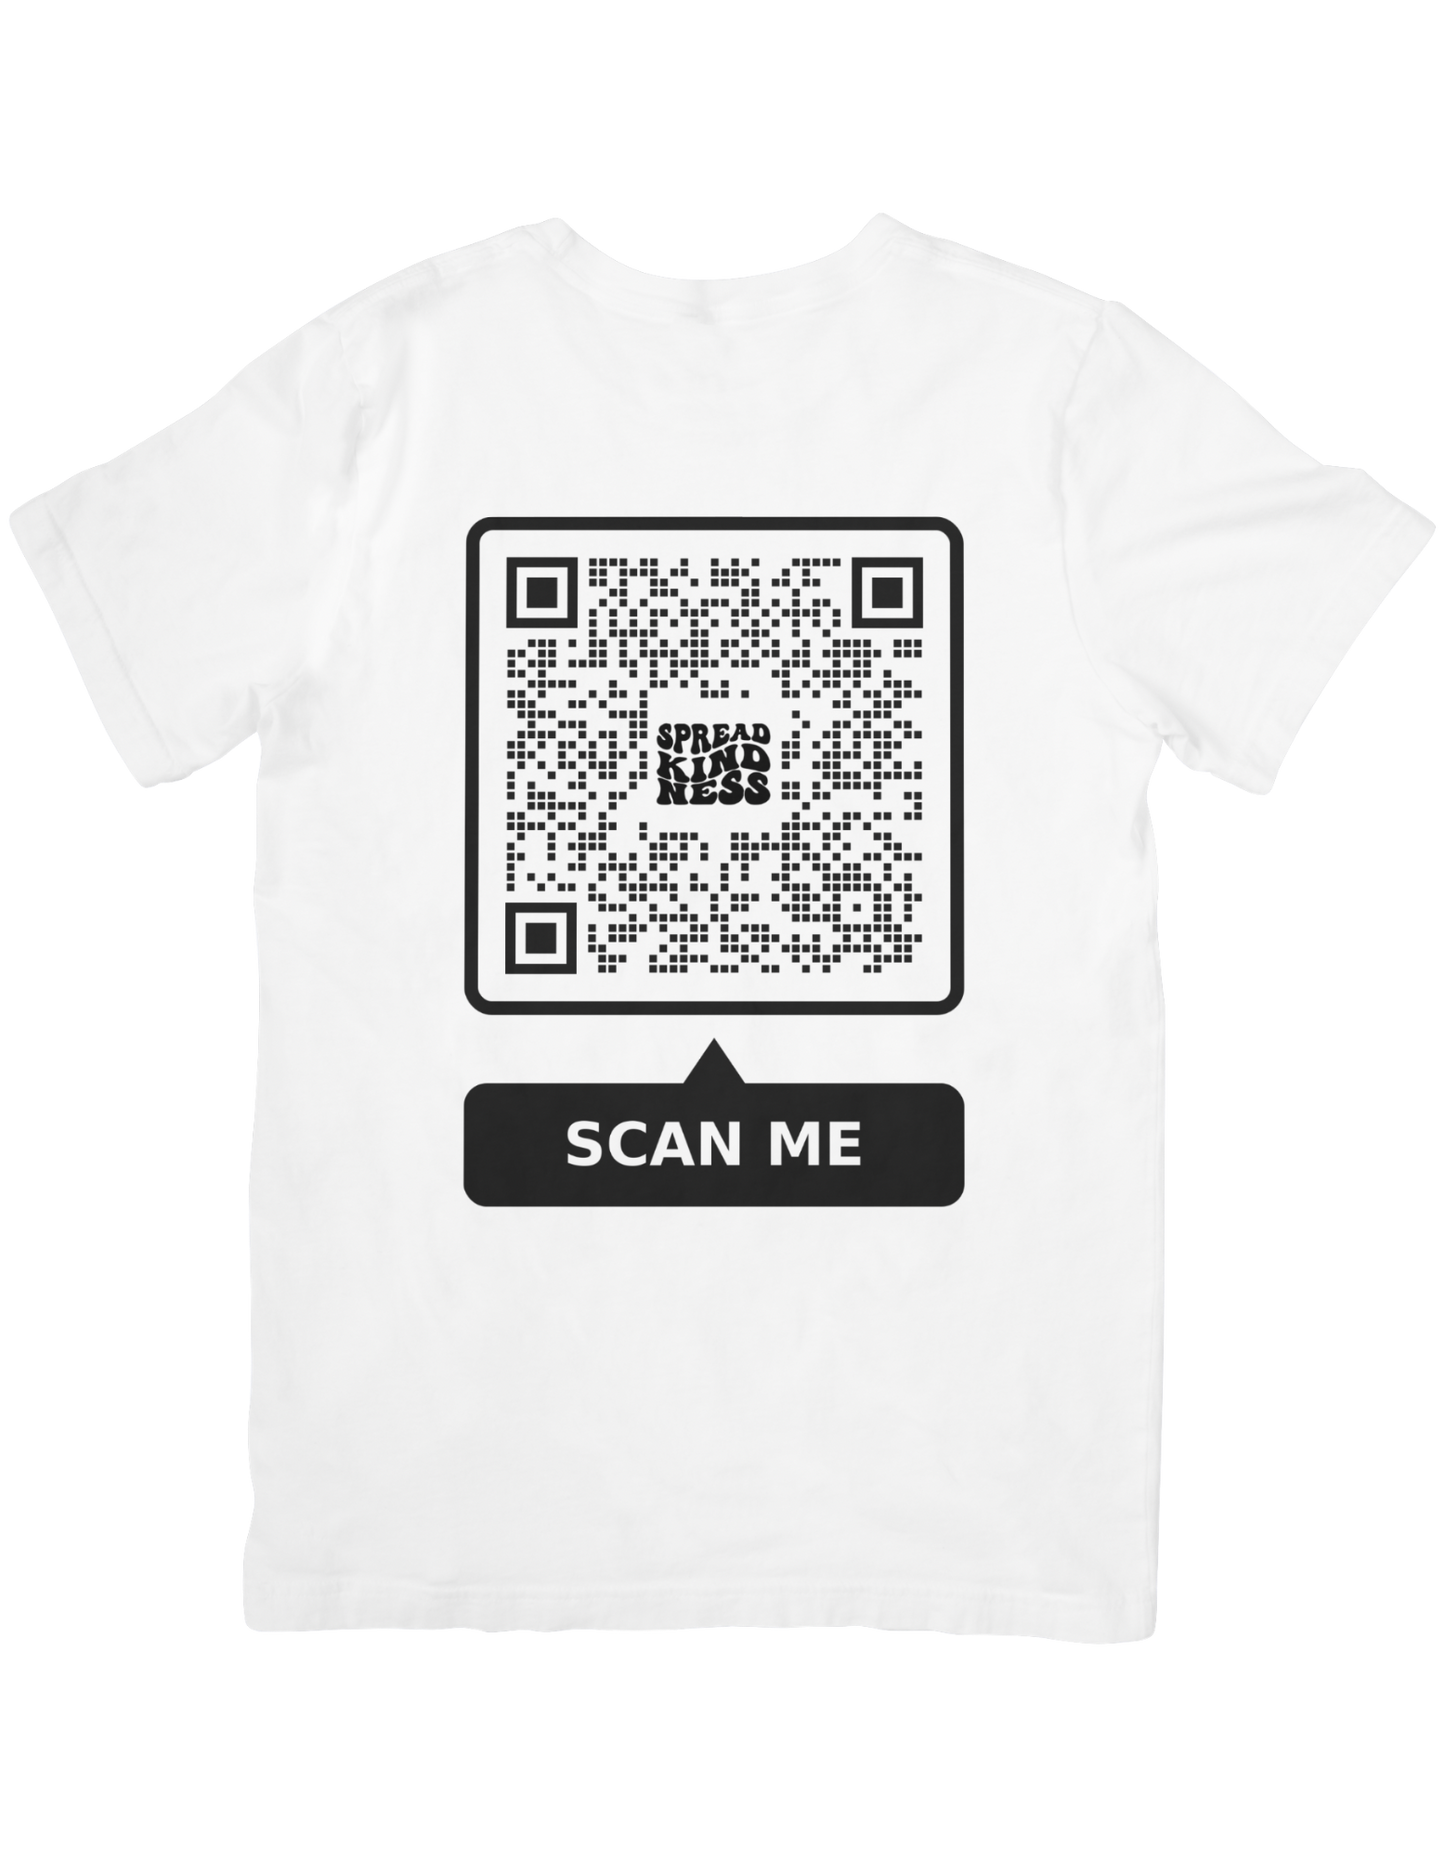 QR code T-Shirt
 "Thank you for never giving up on yourself.”